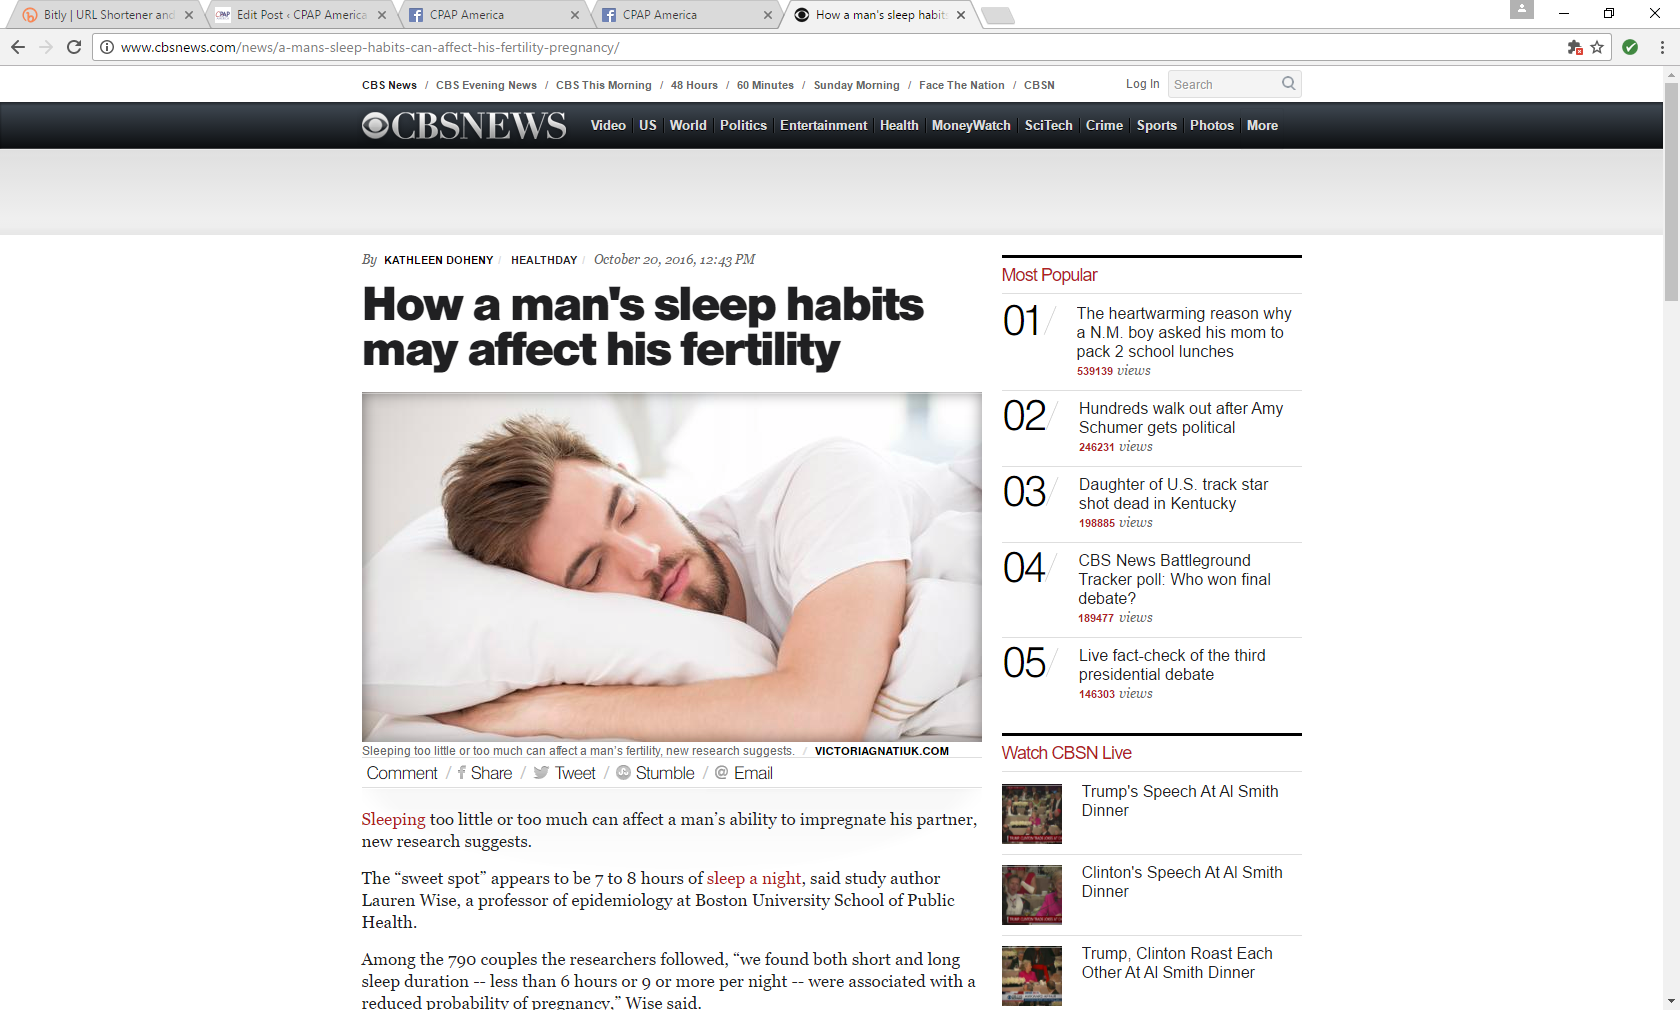 STUDY: A Man's Sleep Habits Could Affect His Fertility